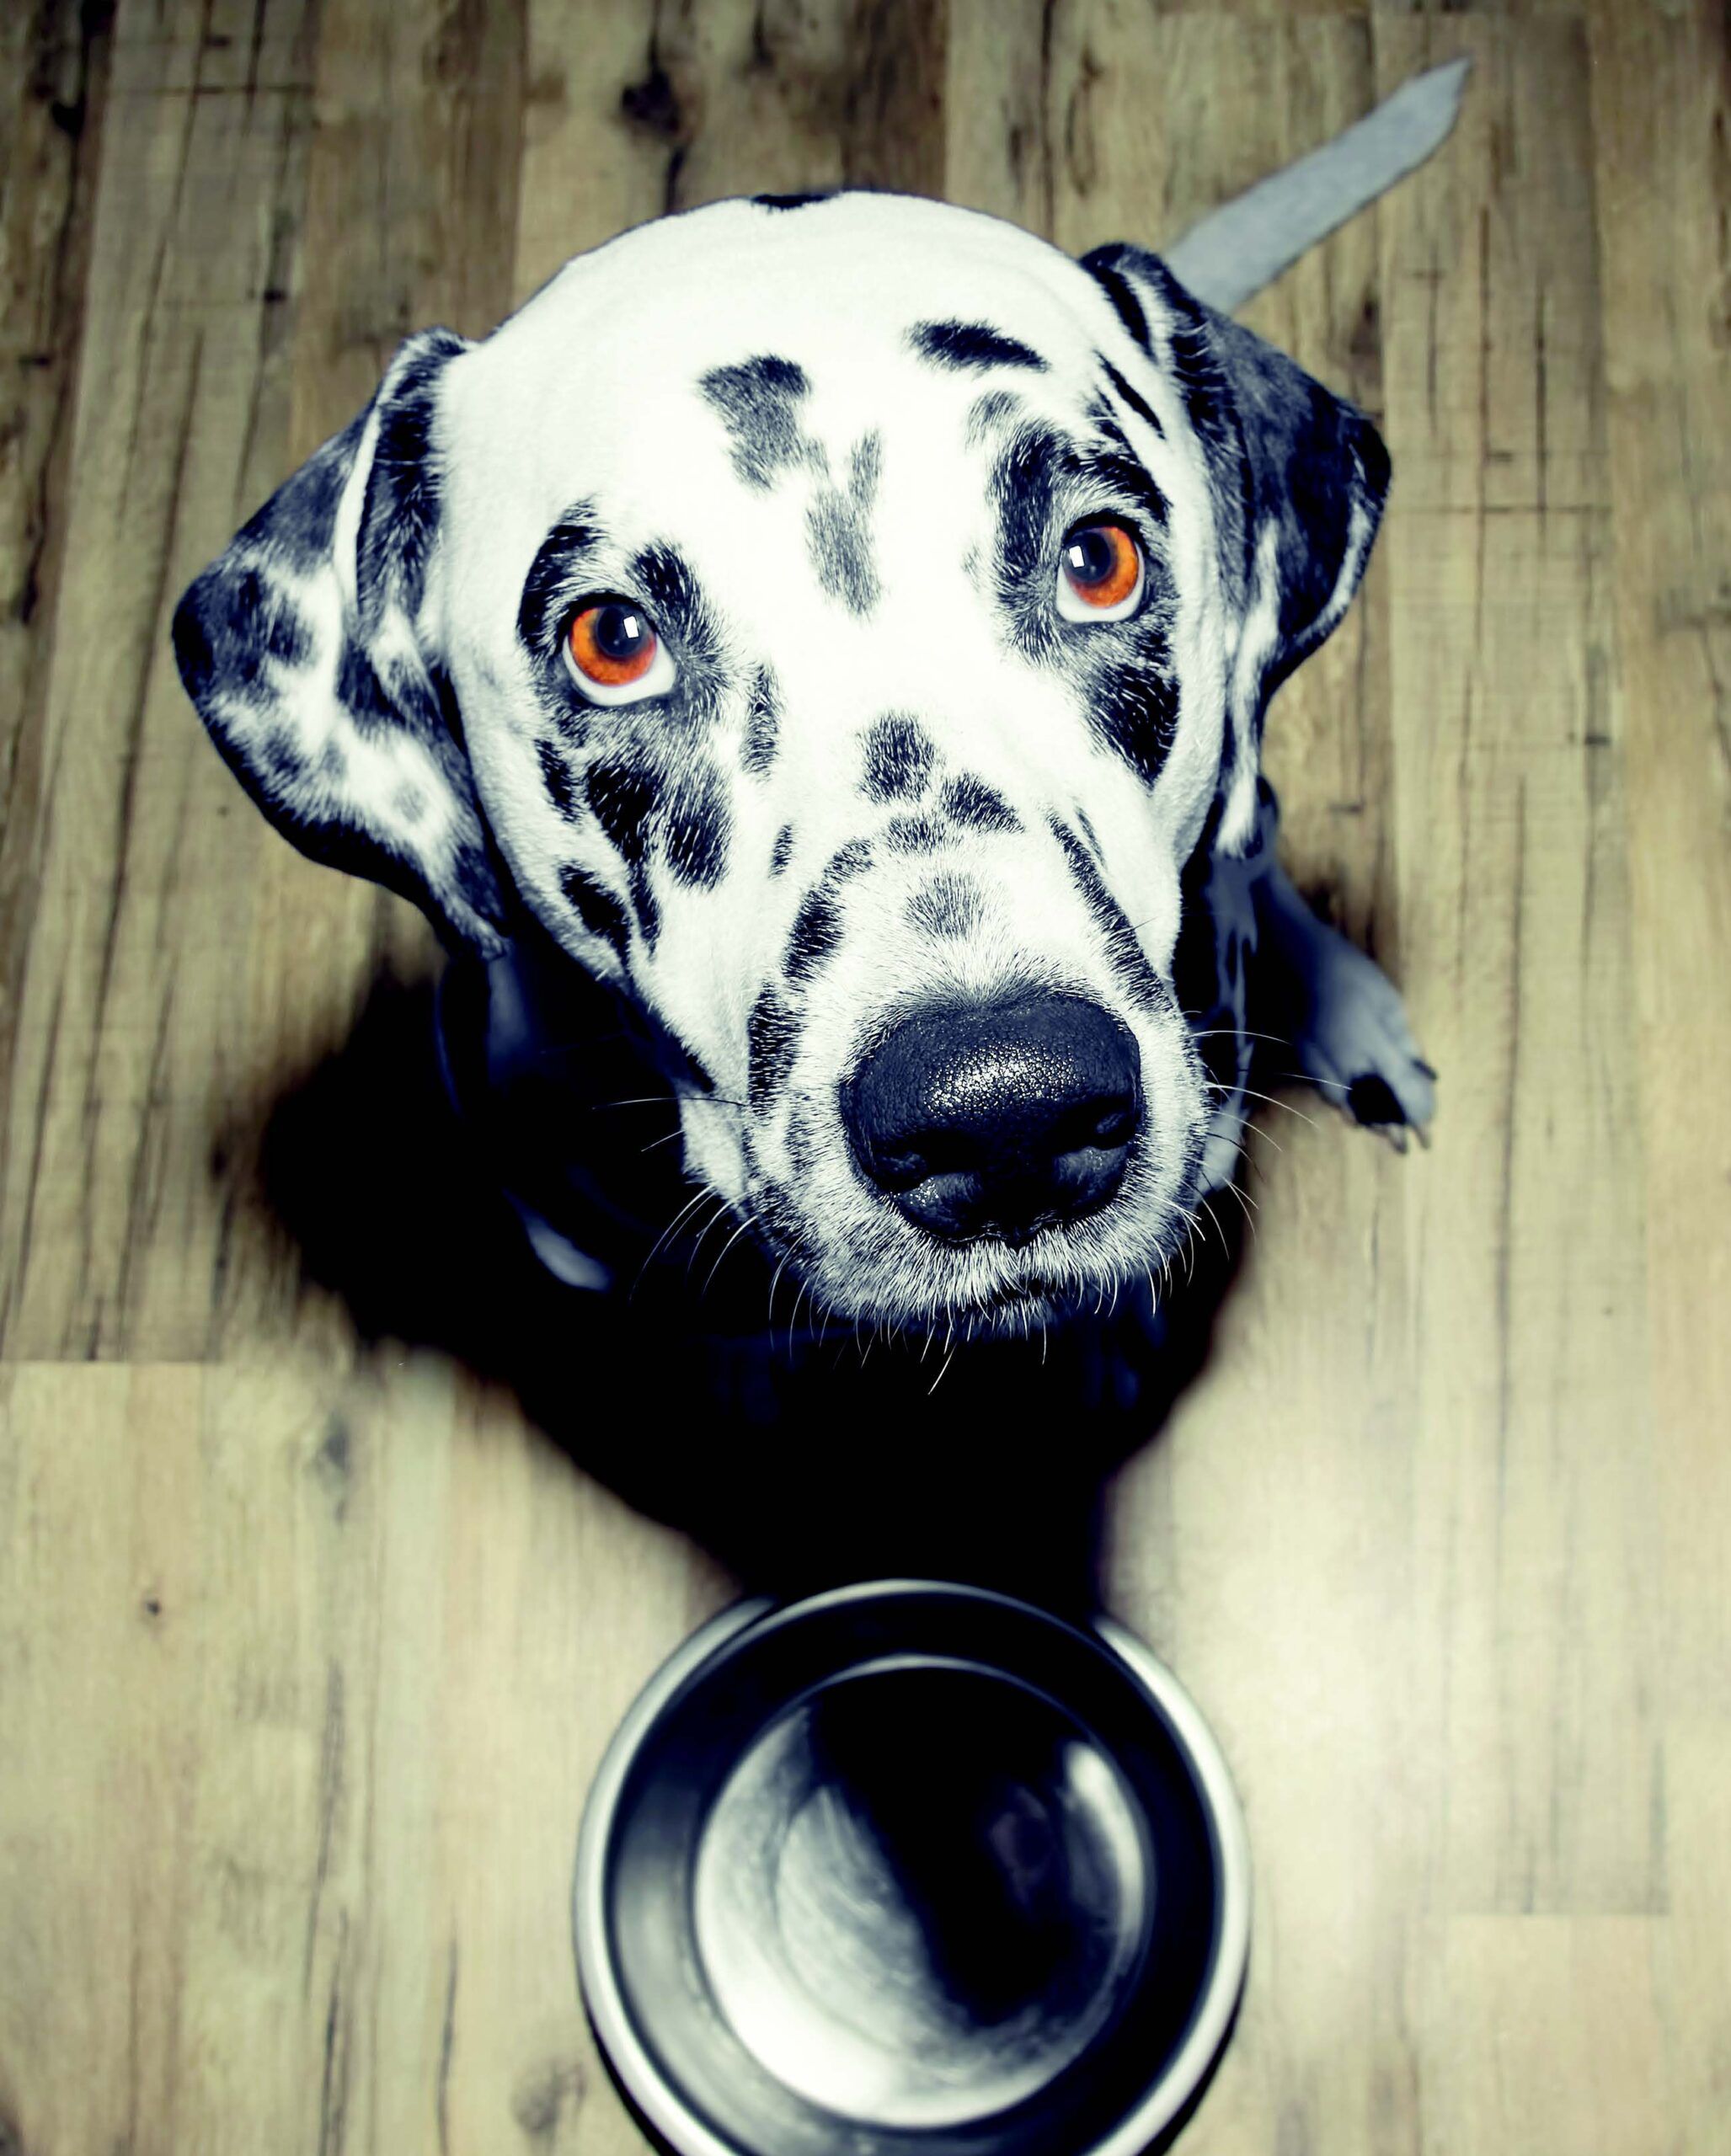 7 Easy Human Food Trends to Share With Your Dog – Dogster